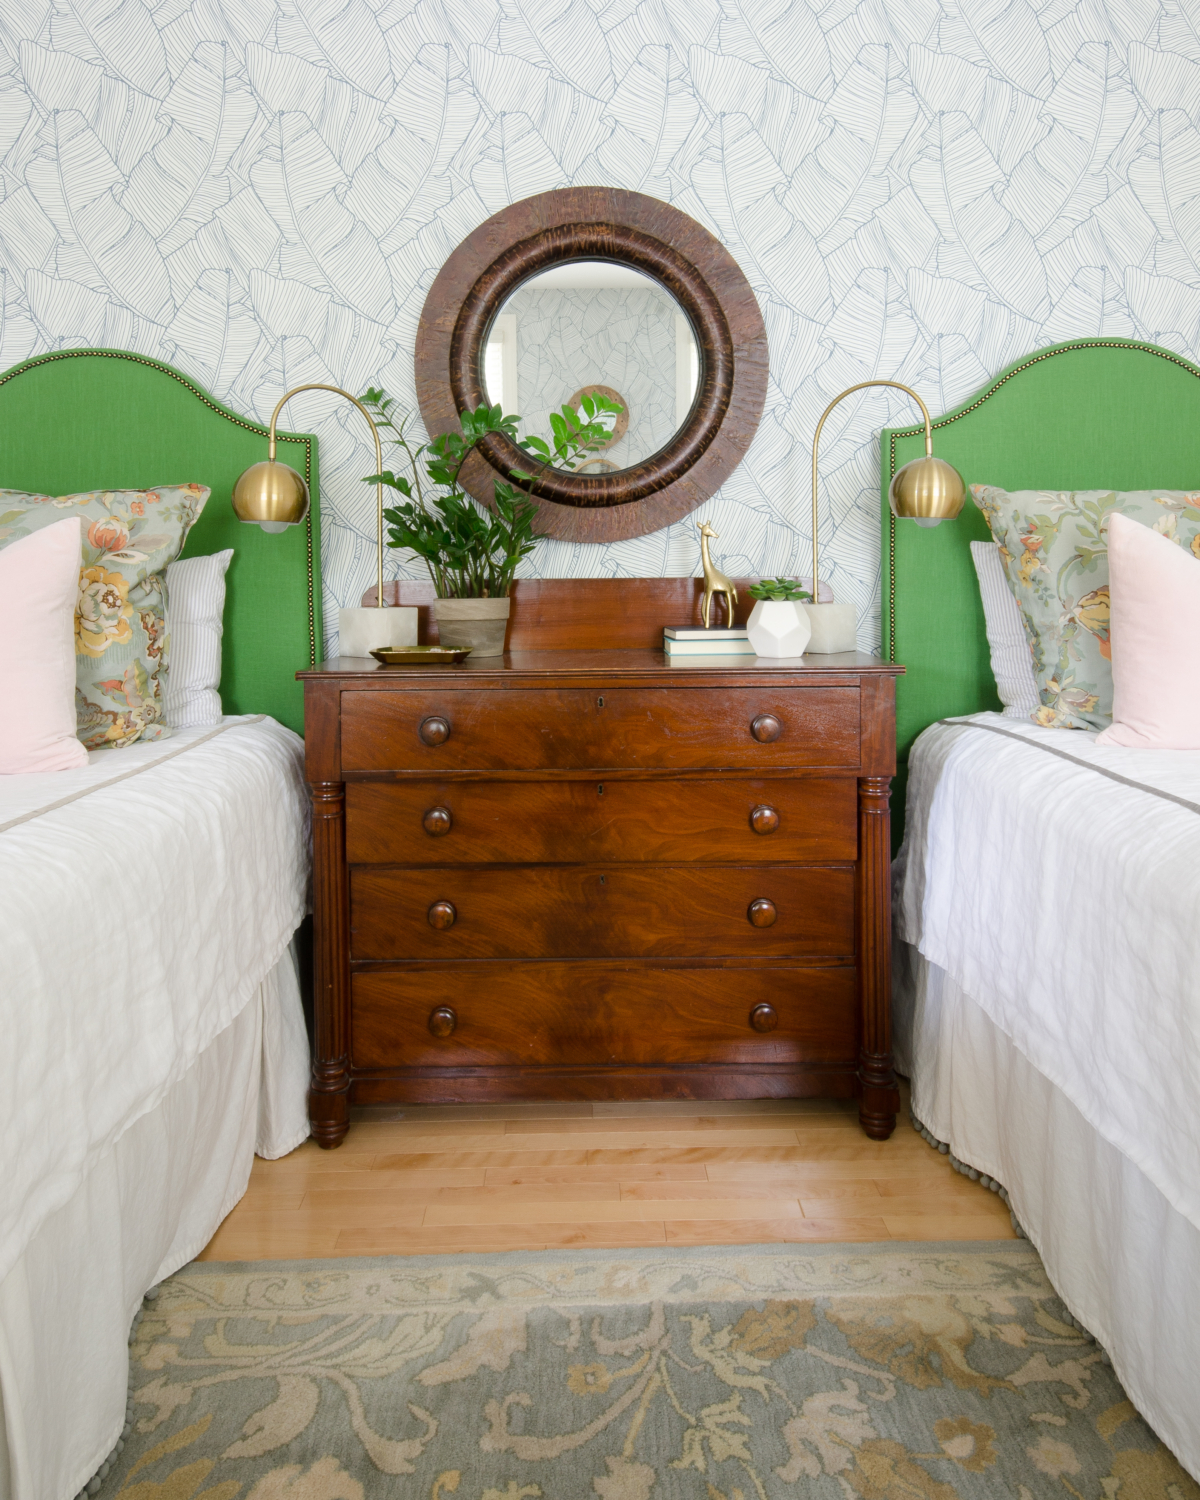 Amazing guest room makeover, you won't even believe the before and after!! Colorful, classic guest room with teal, coral, blush, kelly green, and white. Budget-conscious and lots of amazing DIY projects!